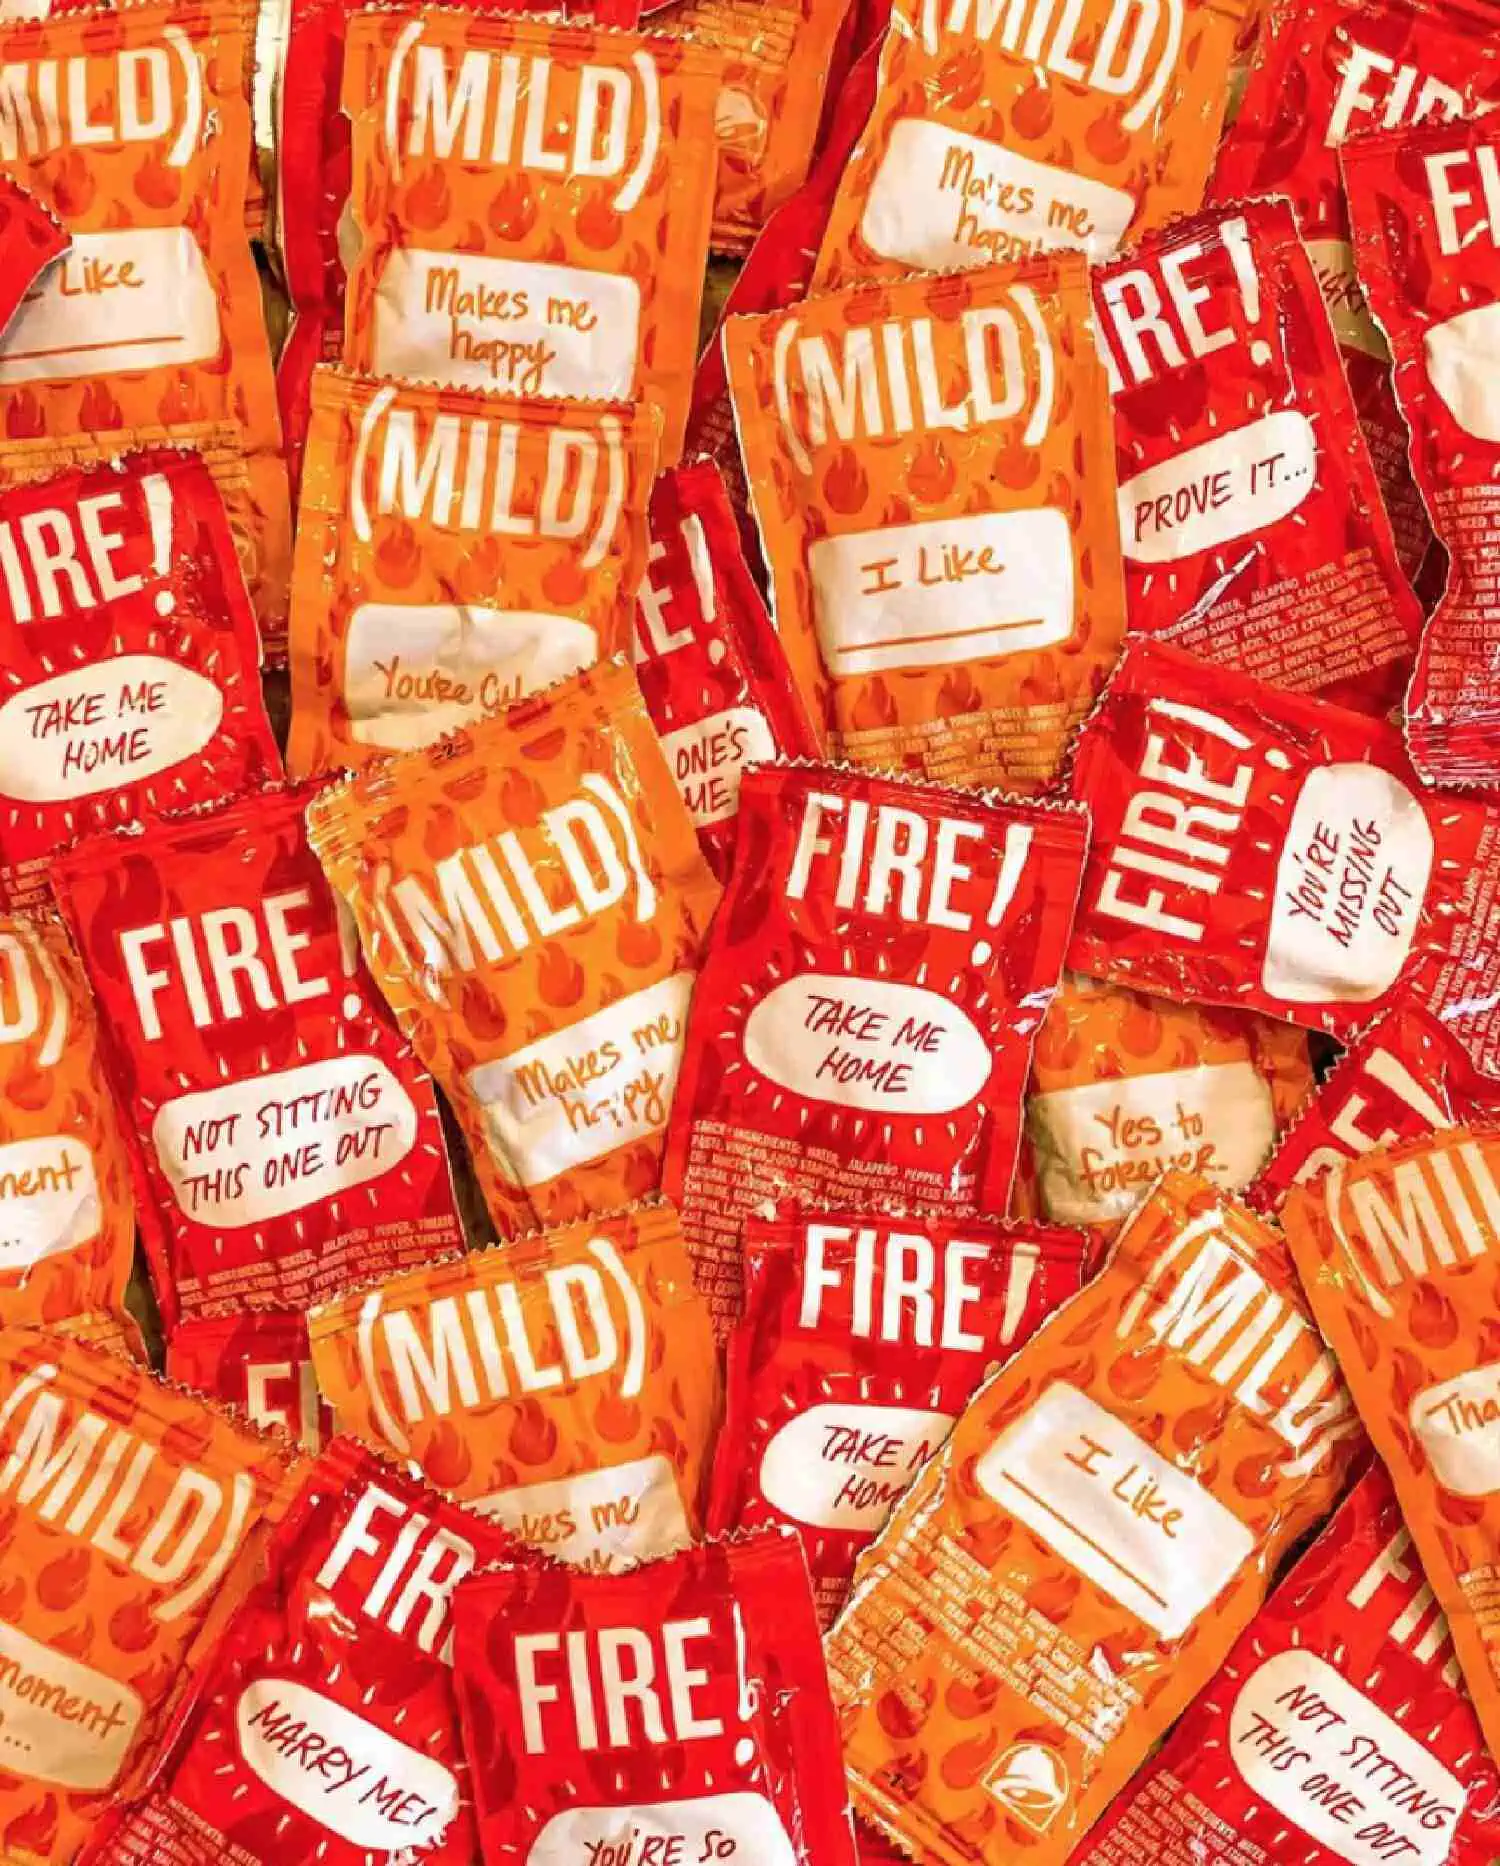 A pile of red and orange colored hot sauce packets with the spiciness level and a saying written on each one.